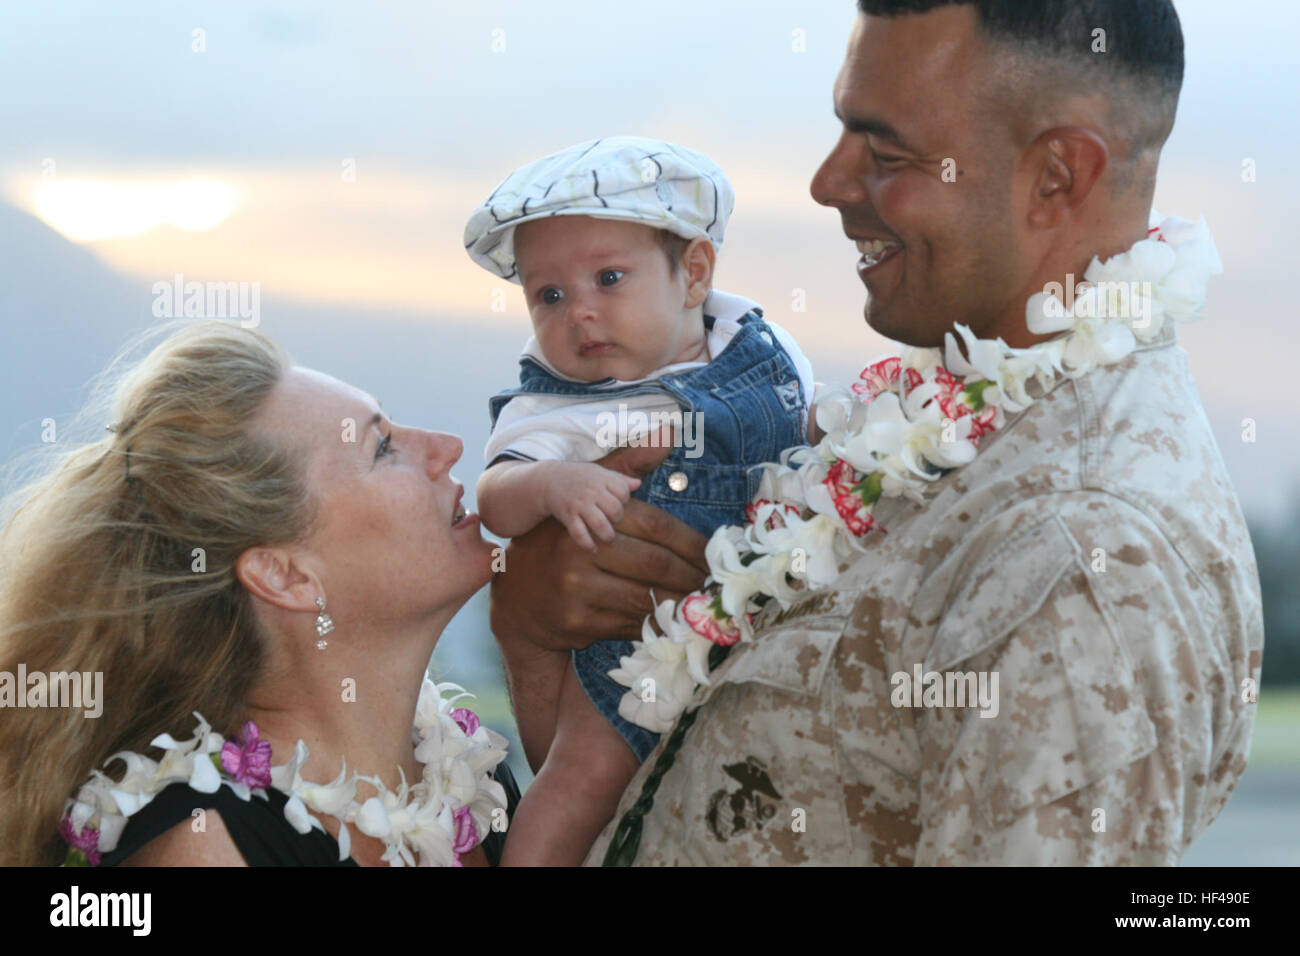 U.S. Marine Corps Master Gunnery Sgt. William Perez, Avionics Officer, Combat Logistics Battalion-3, greets his wife and, for the first time, his newborn son, after arriving with Marine Heavy Helicopter (HMH) Squadron-363 Marines at Marine Corps Air Station Kaneohe Bay, Hawaii, Sept. 13, 2010. Marines and Sailors from HMH-363 returned from a seven month deployment to Afghanistan in support of Operation Enduring Freedom. (U.S. Marine Corps photo by Lance Cpl. Jody Lee Smith/Released) 100913-M-9232S-030 (4993128551) Stock Photo